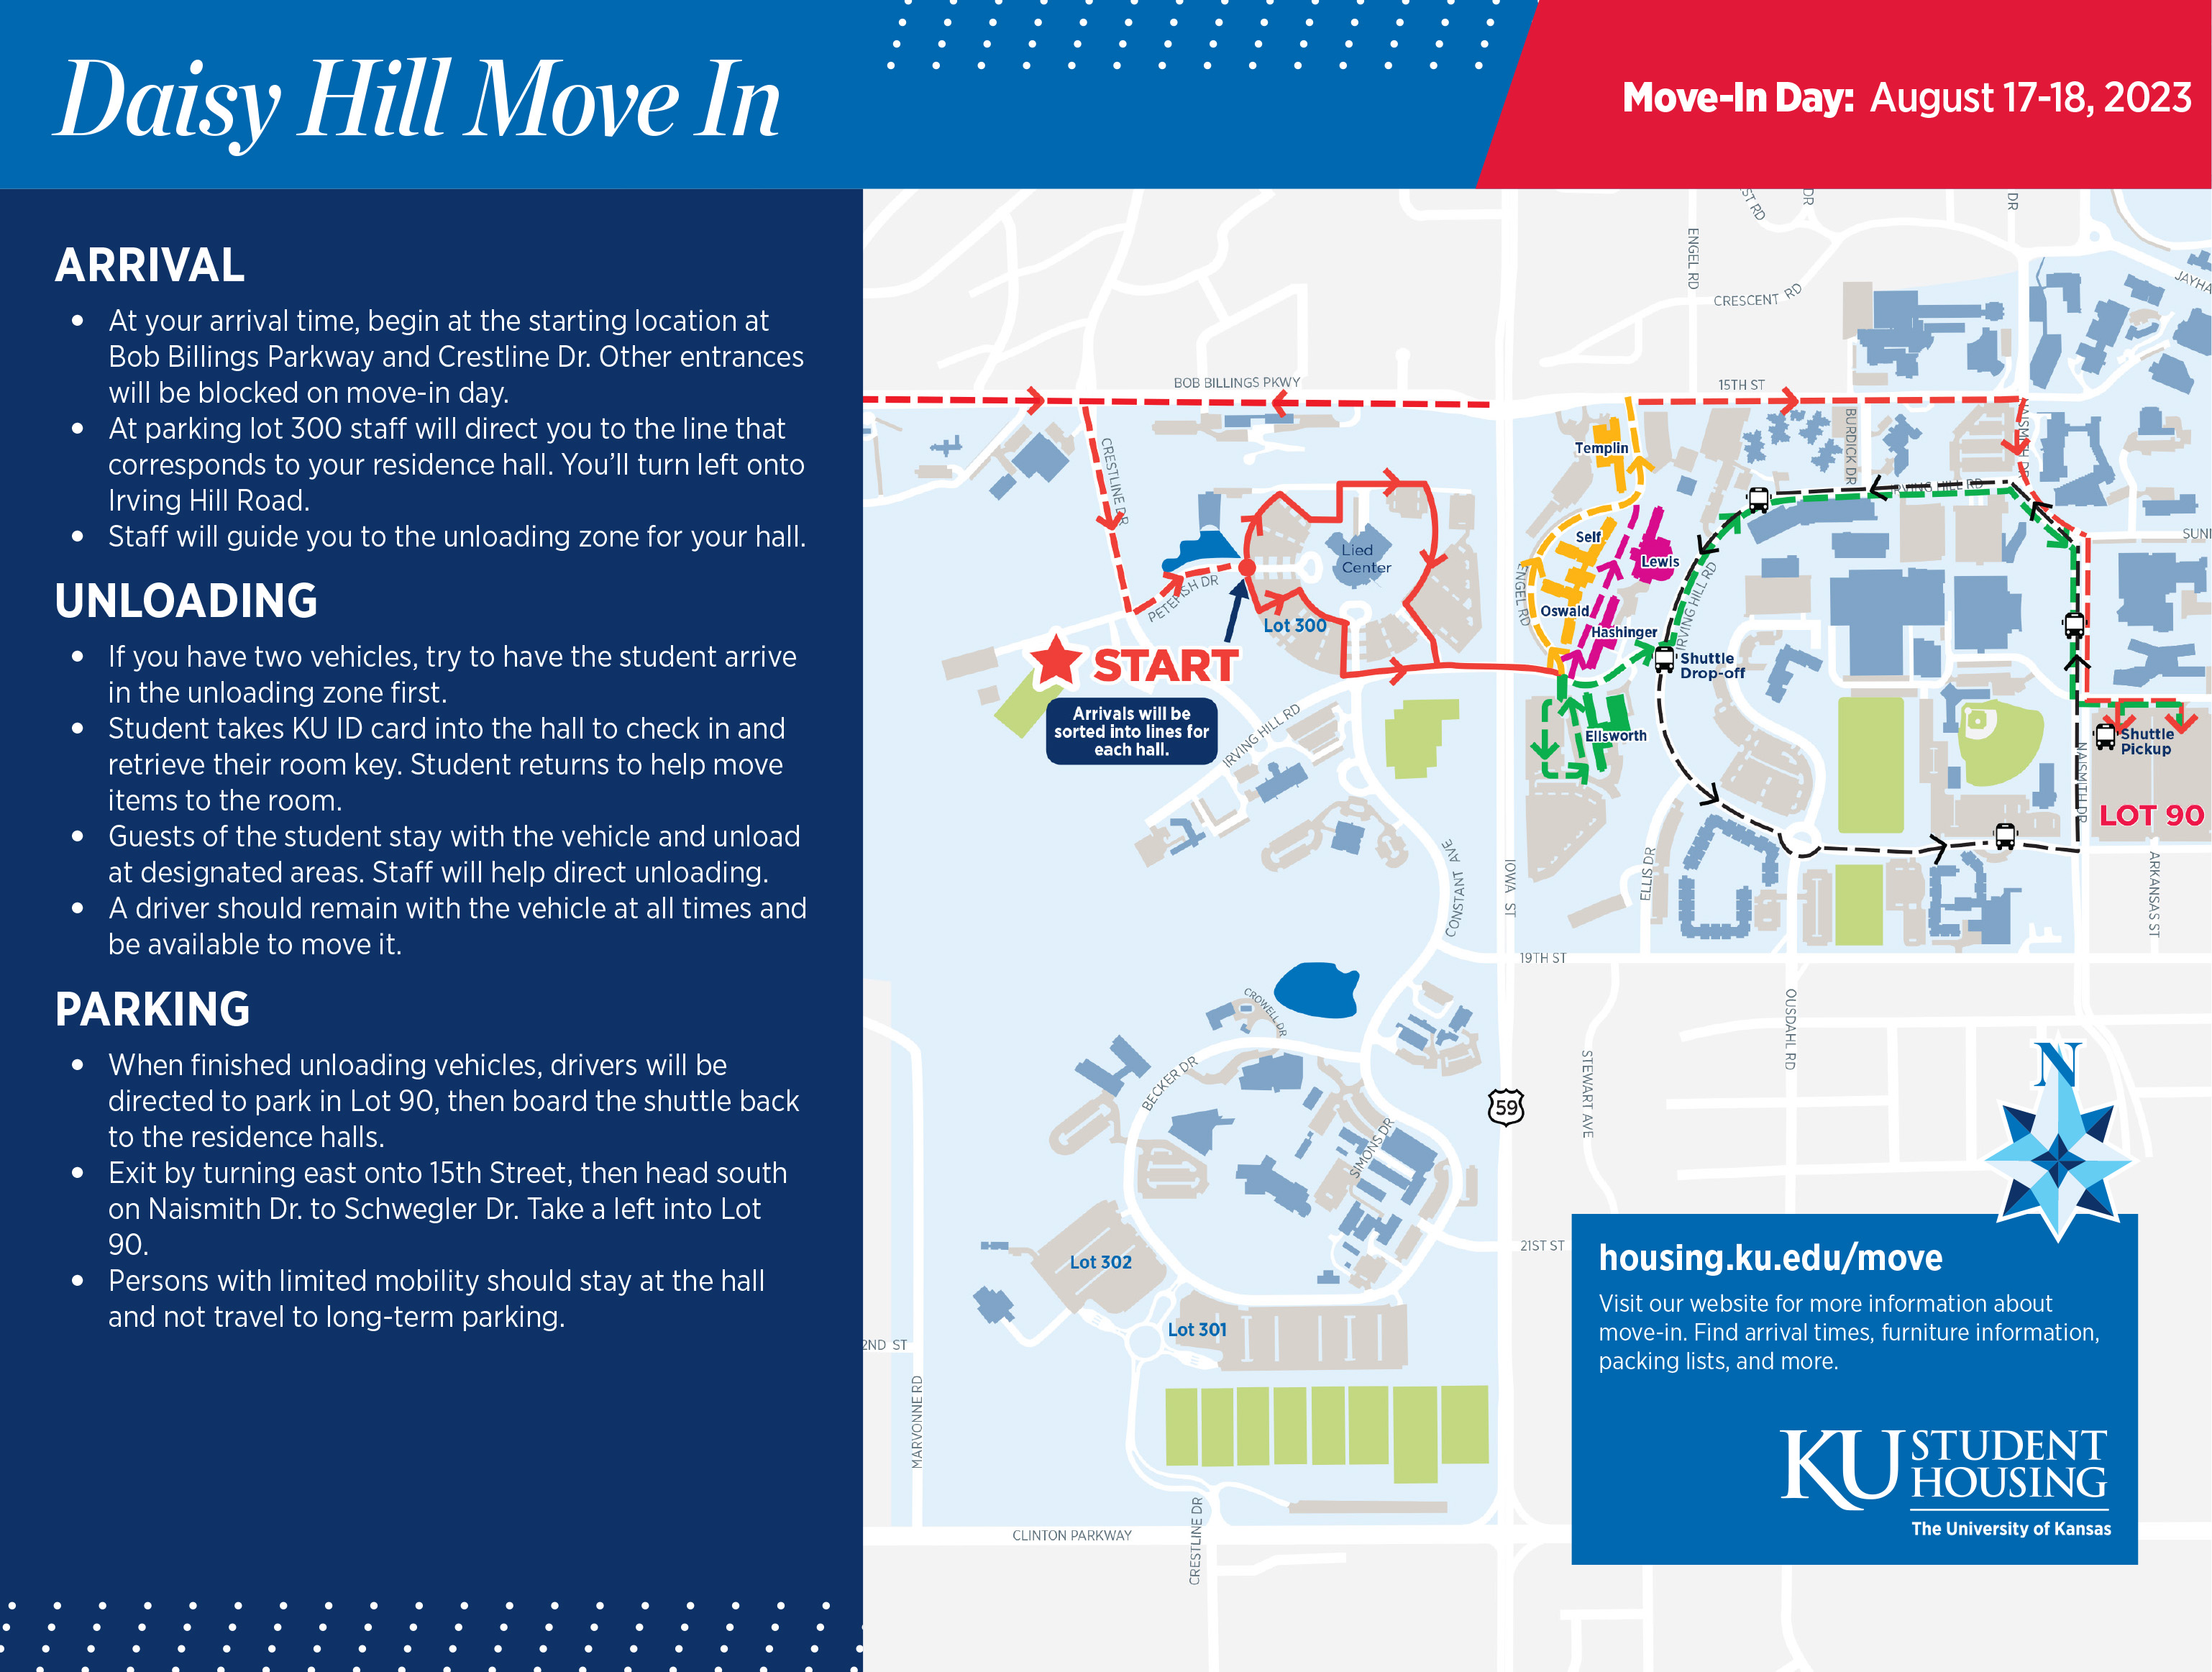 Daisy Hill move-in map preview image